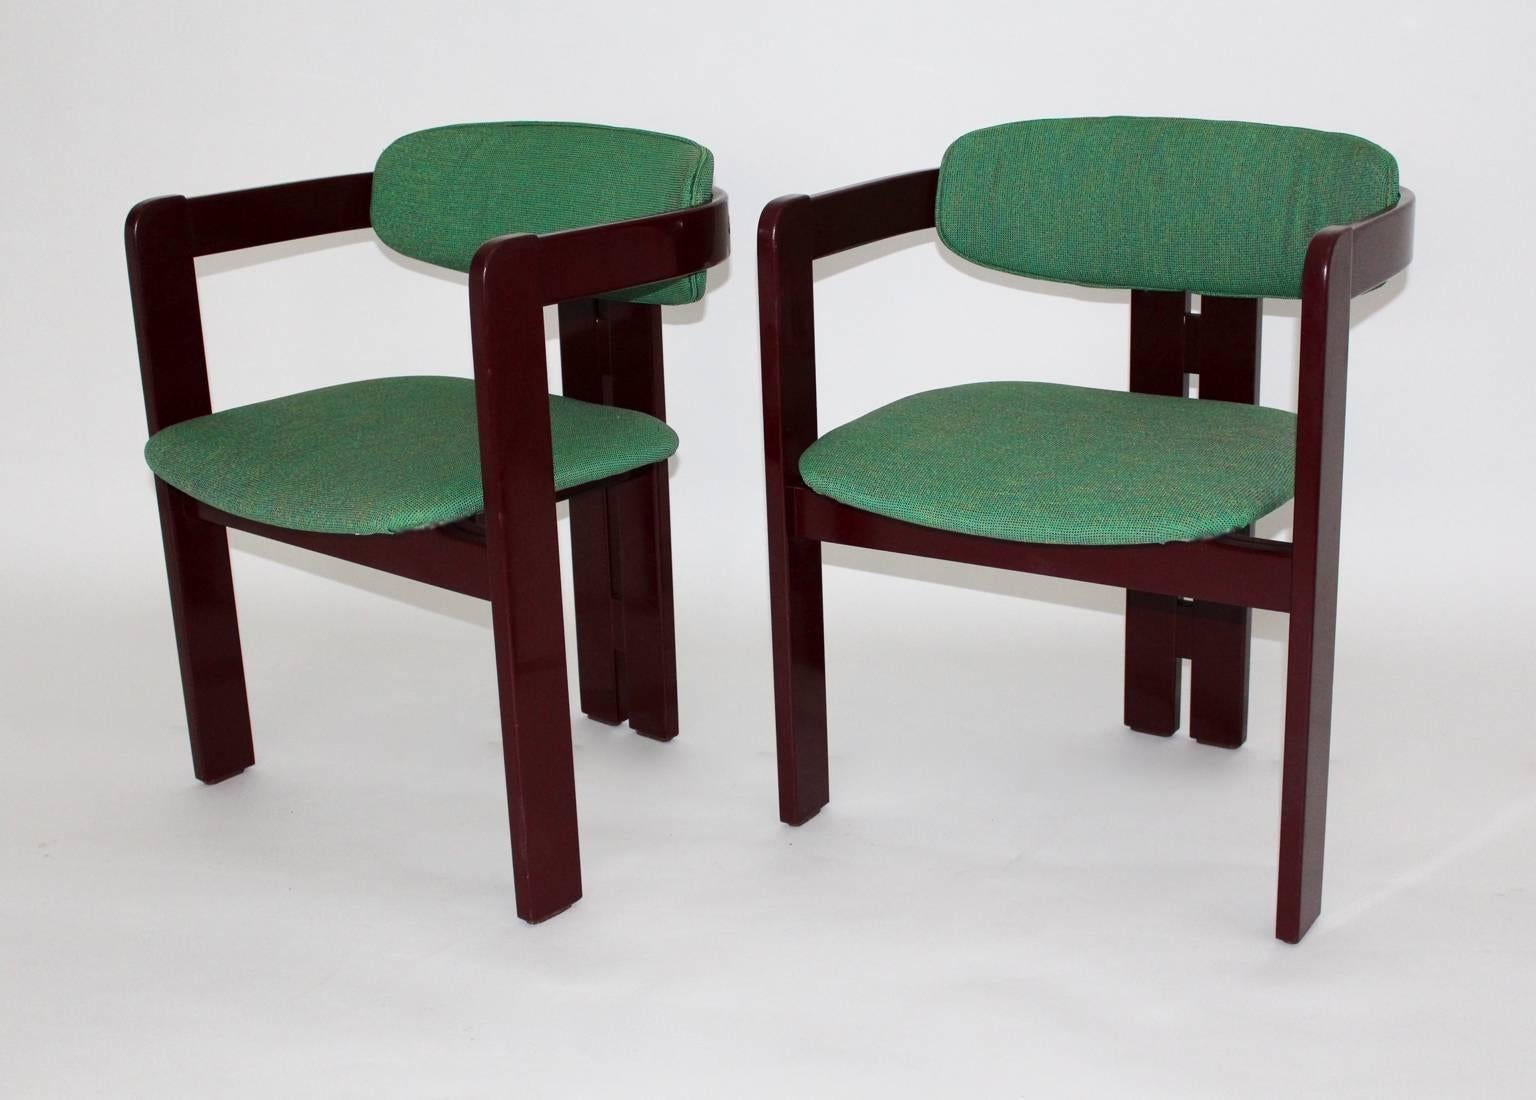 An Italian vintage set of two red lacquered beech dining chairs from the 1970s.
The beechwood frame is red brown lacquered and shows minor signs of age, while the seat and back are new covered with green speckled textil fabric.
So the overall